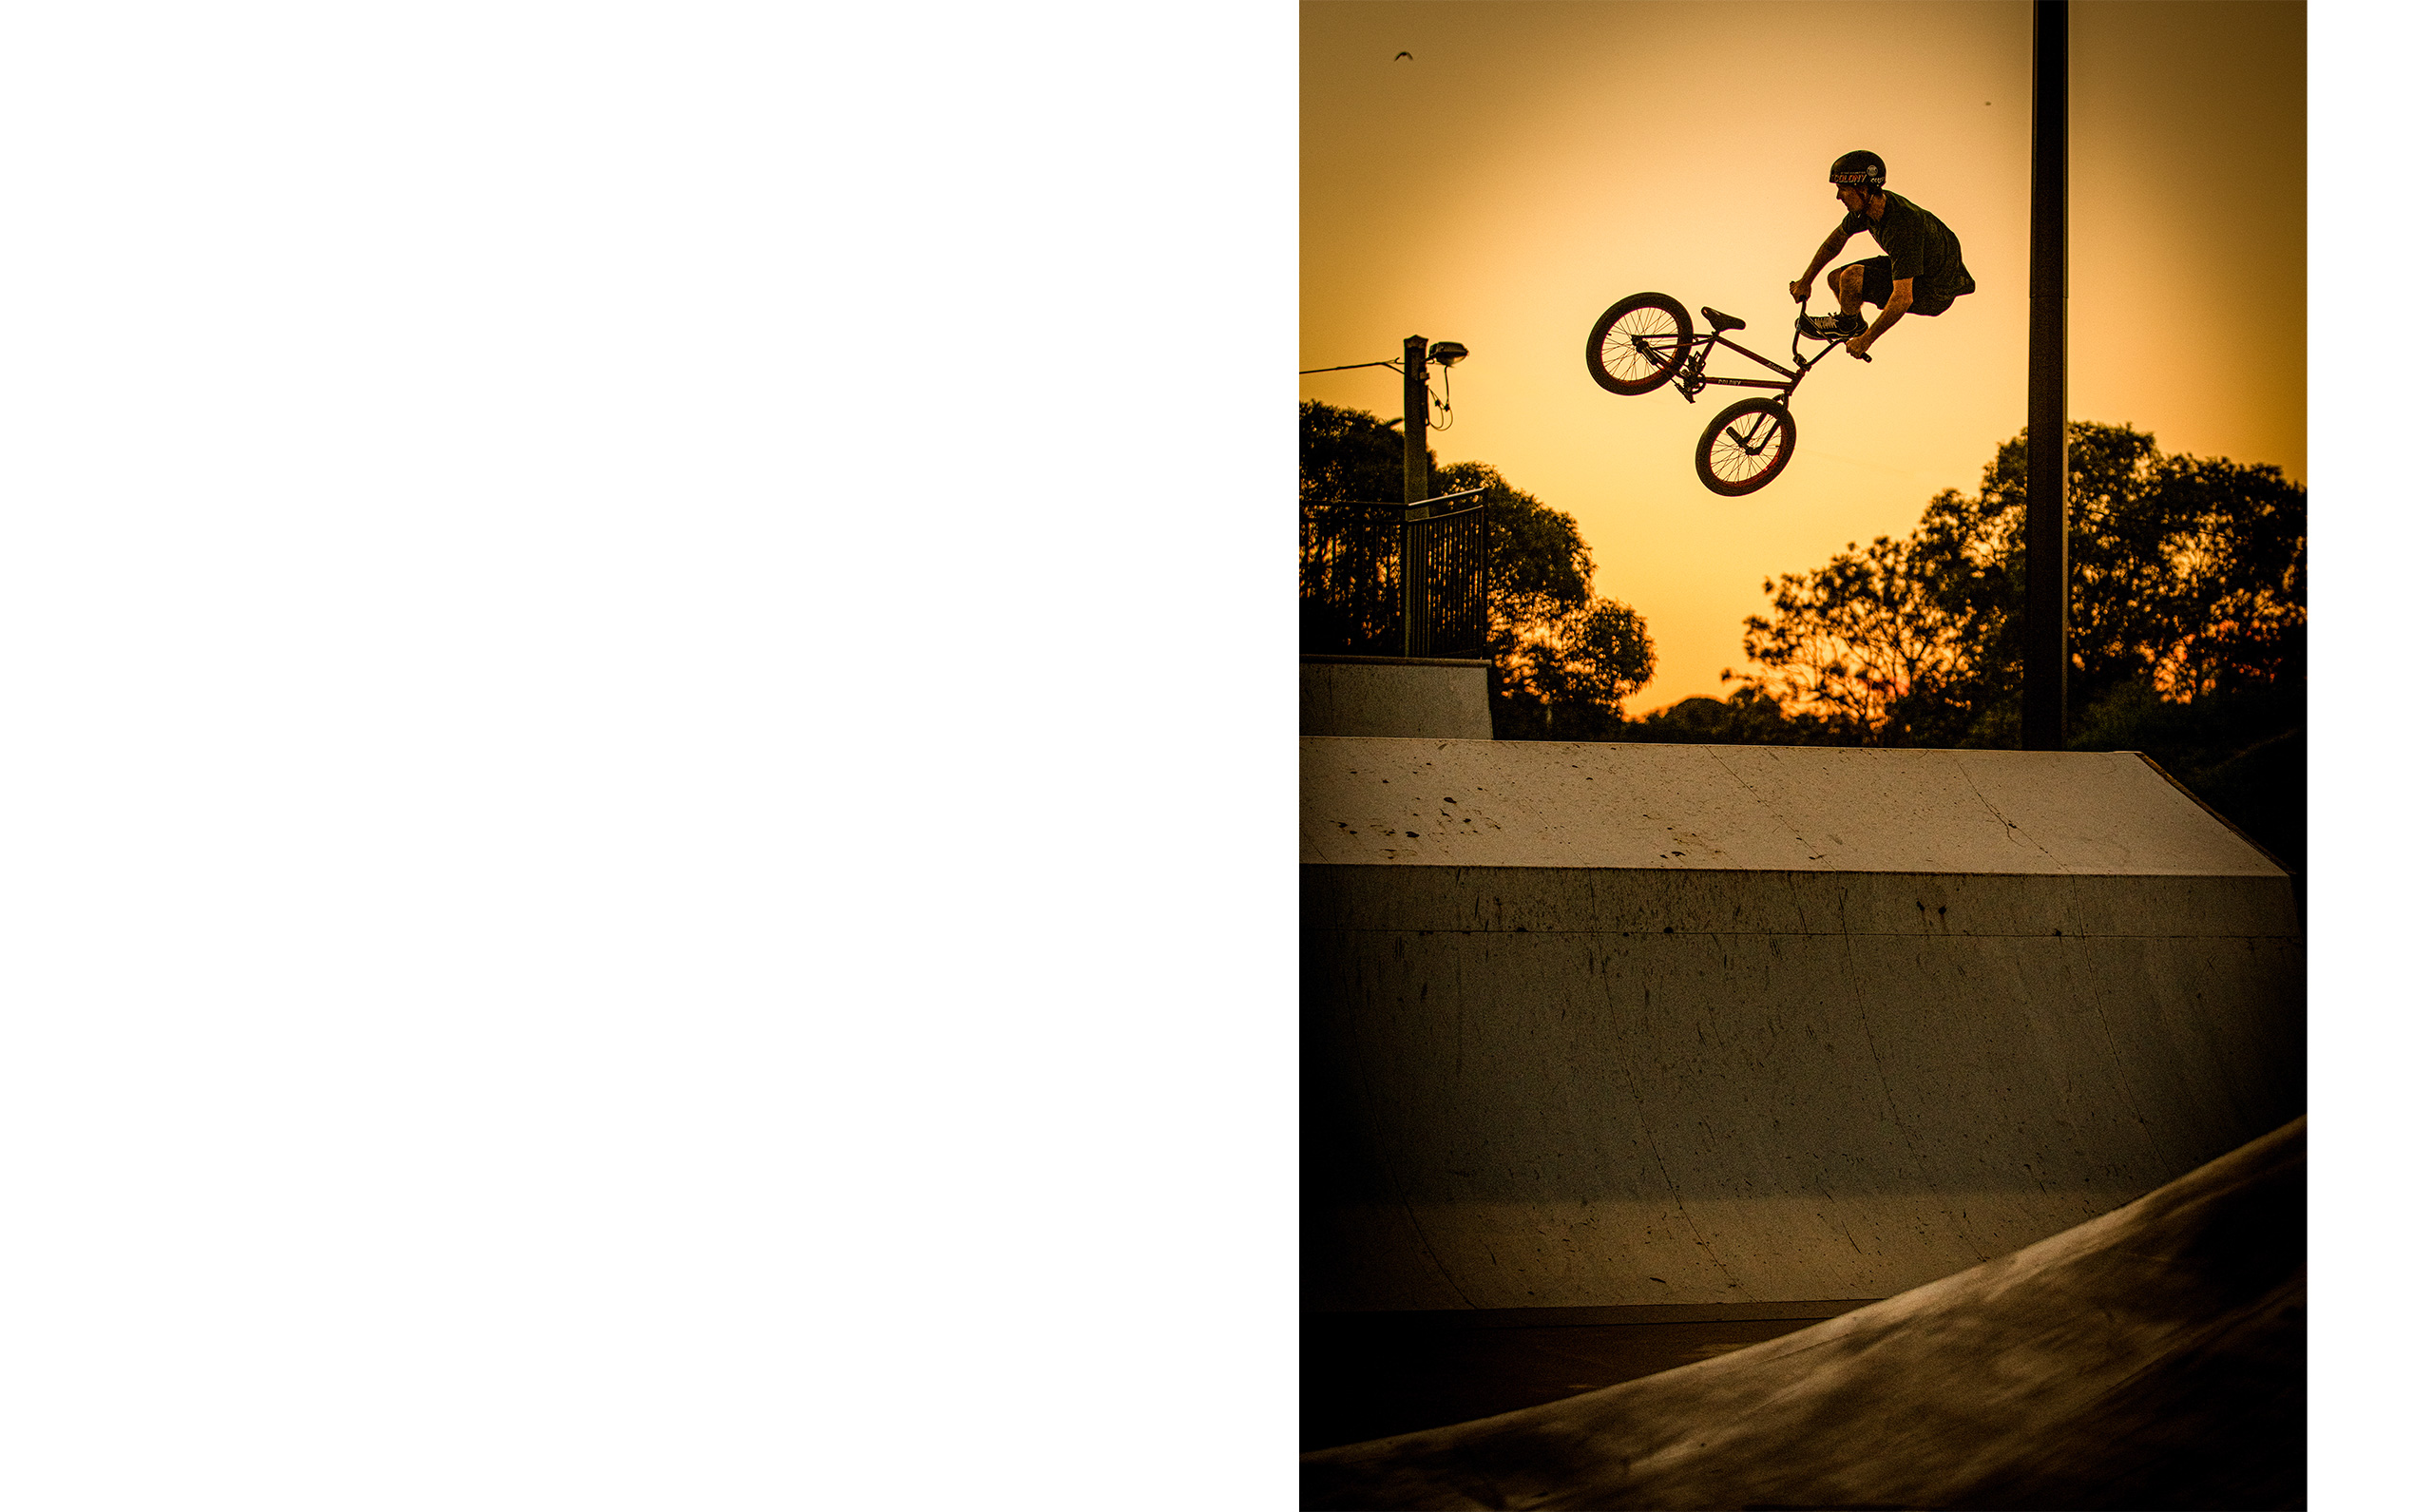 Chris James showing his student at the time how to 360 whip at Beenleigh BMX Park.